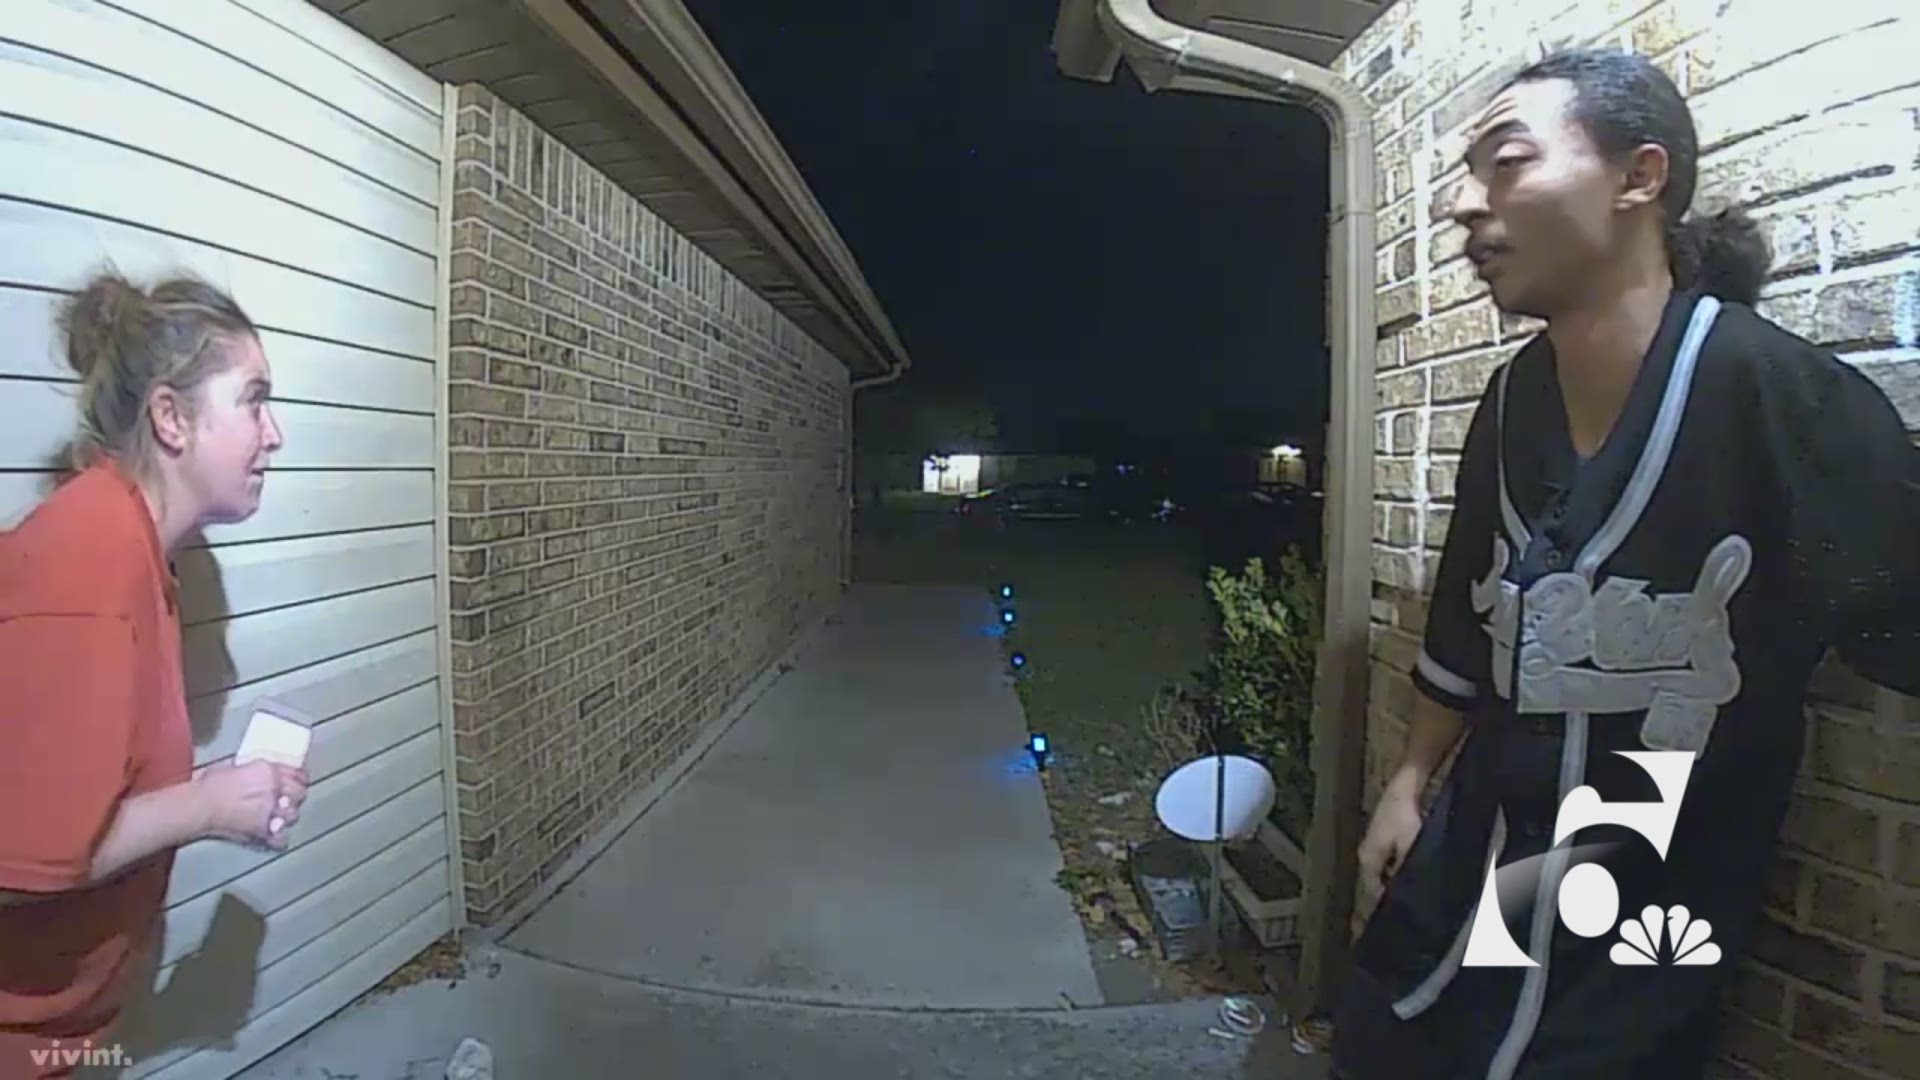 Surveillance footage shows would-be thieves approaching a woman with firearms outside her home in Killeen.